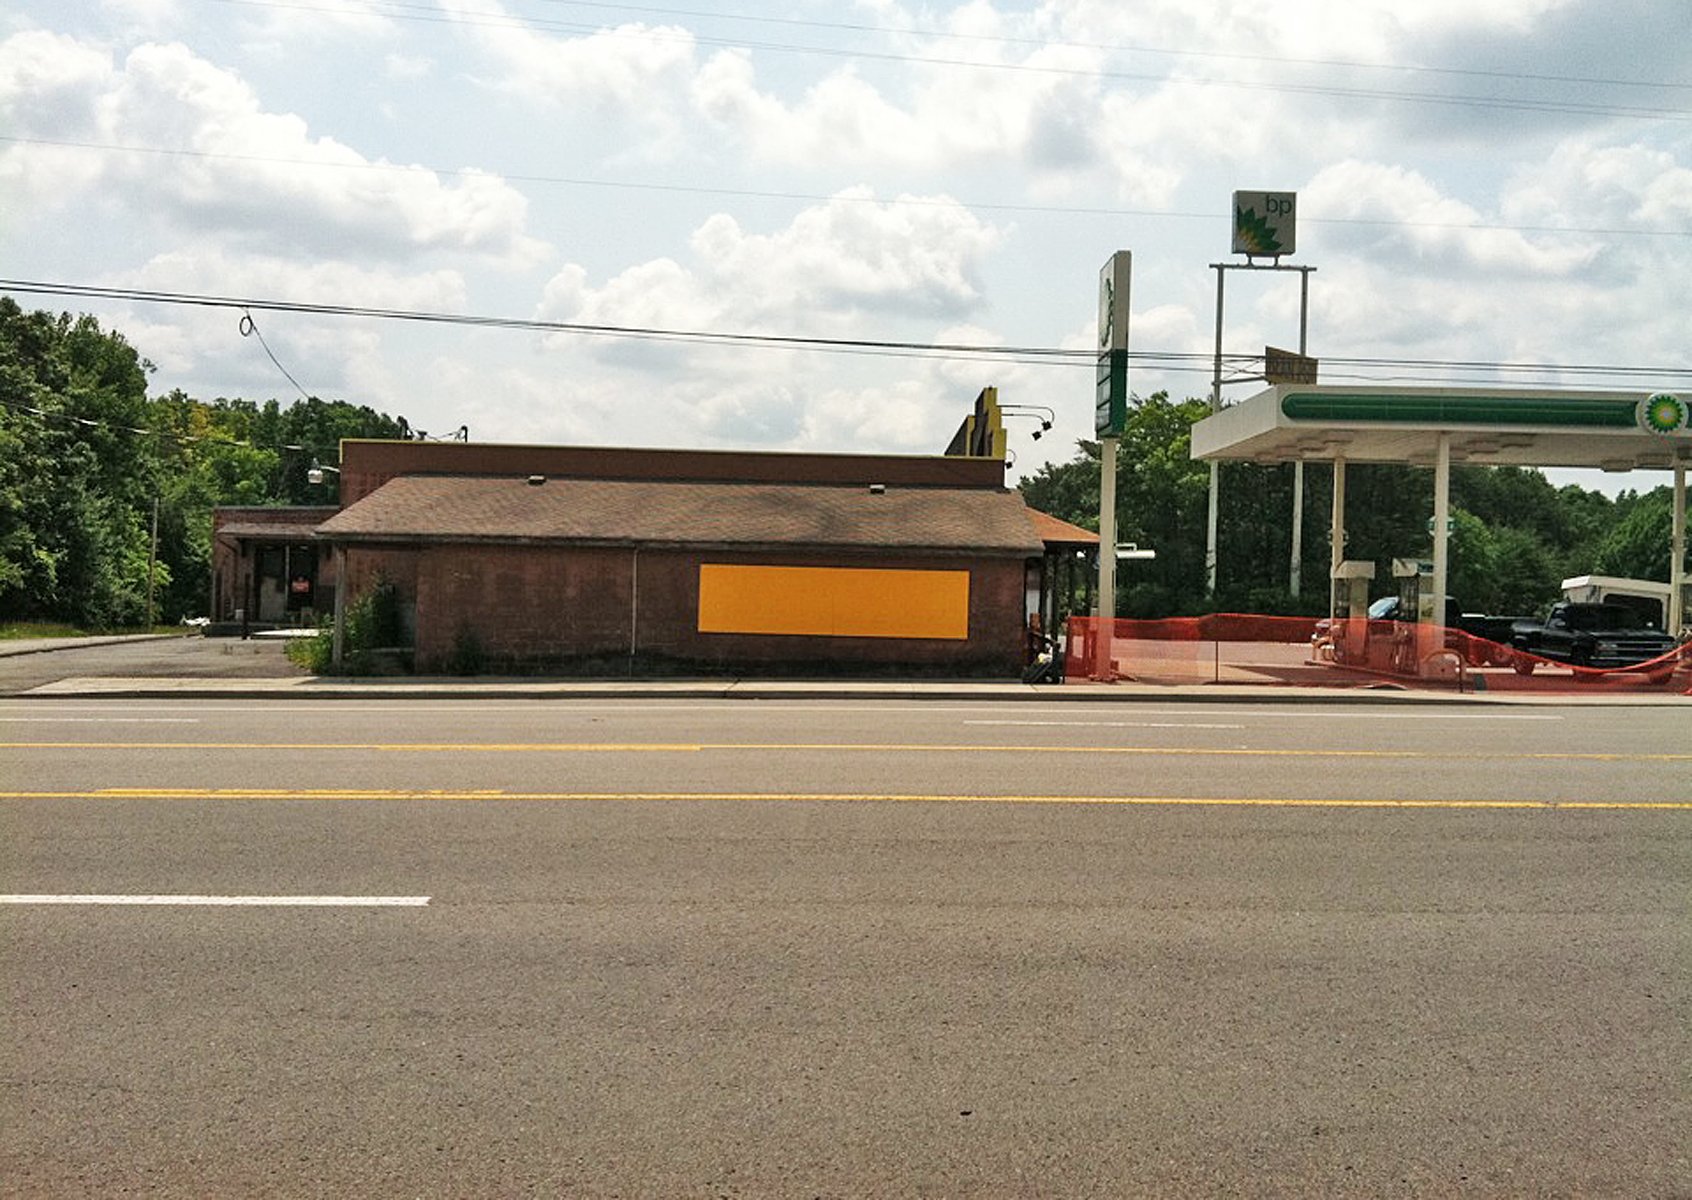 A minimalist yellow rectangle on a low brick building next to a BP gas station.